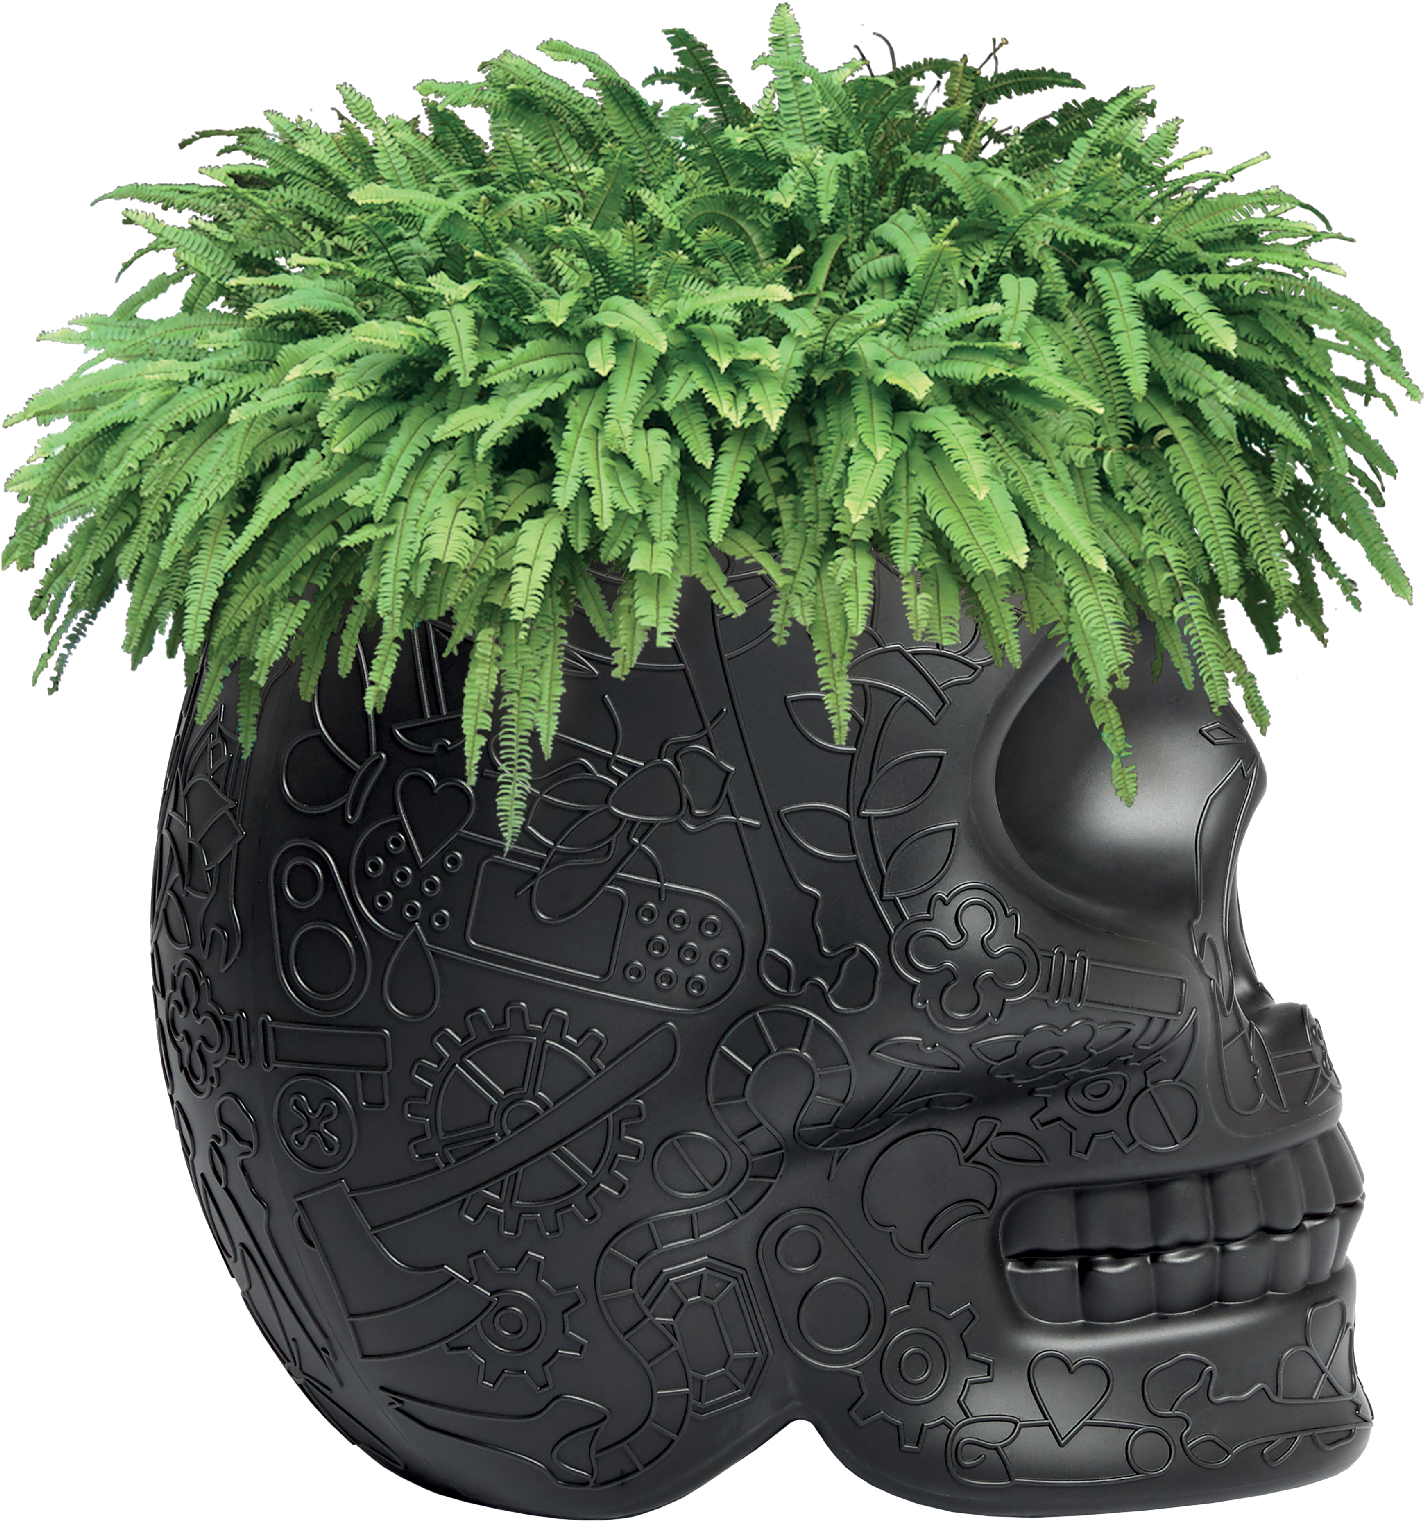 Steampunk Skull Planterwith Ferns PNG